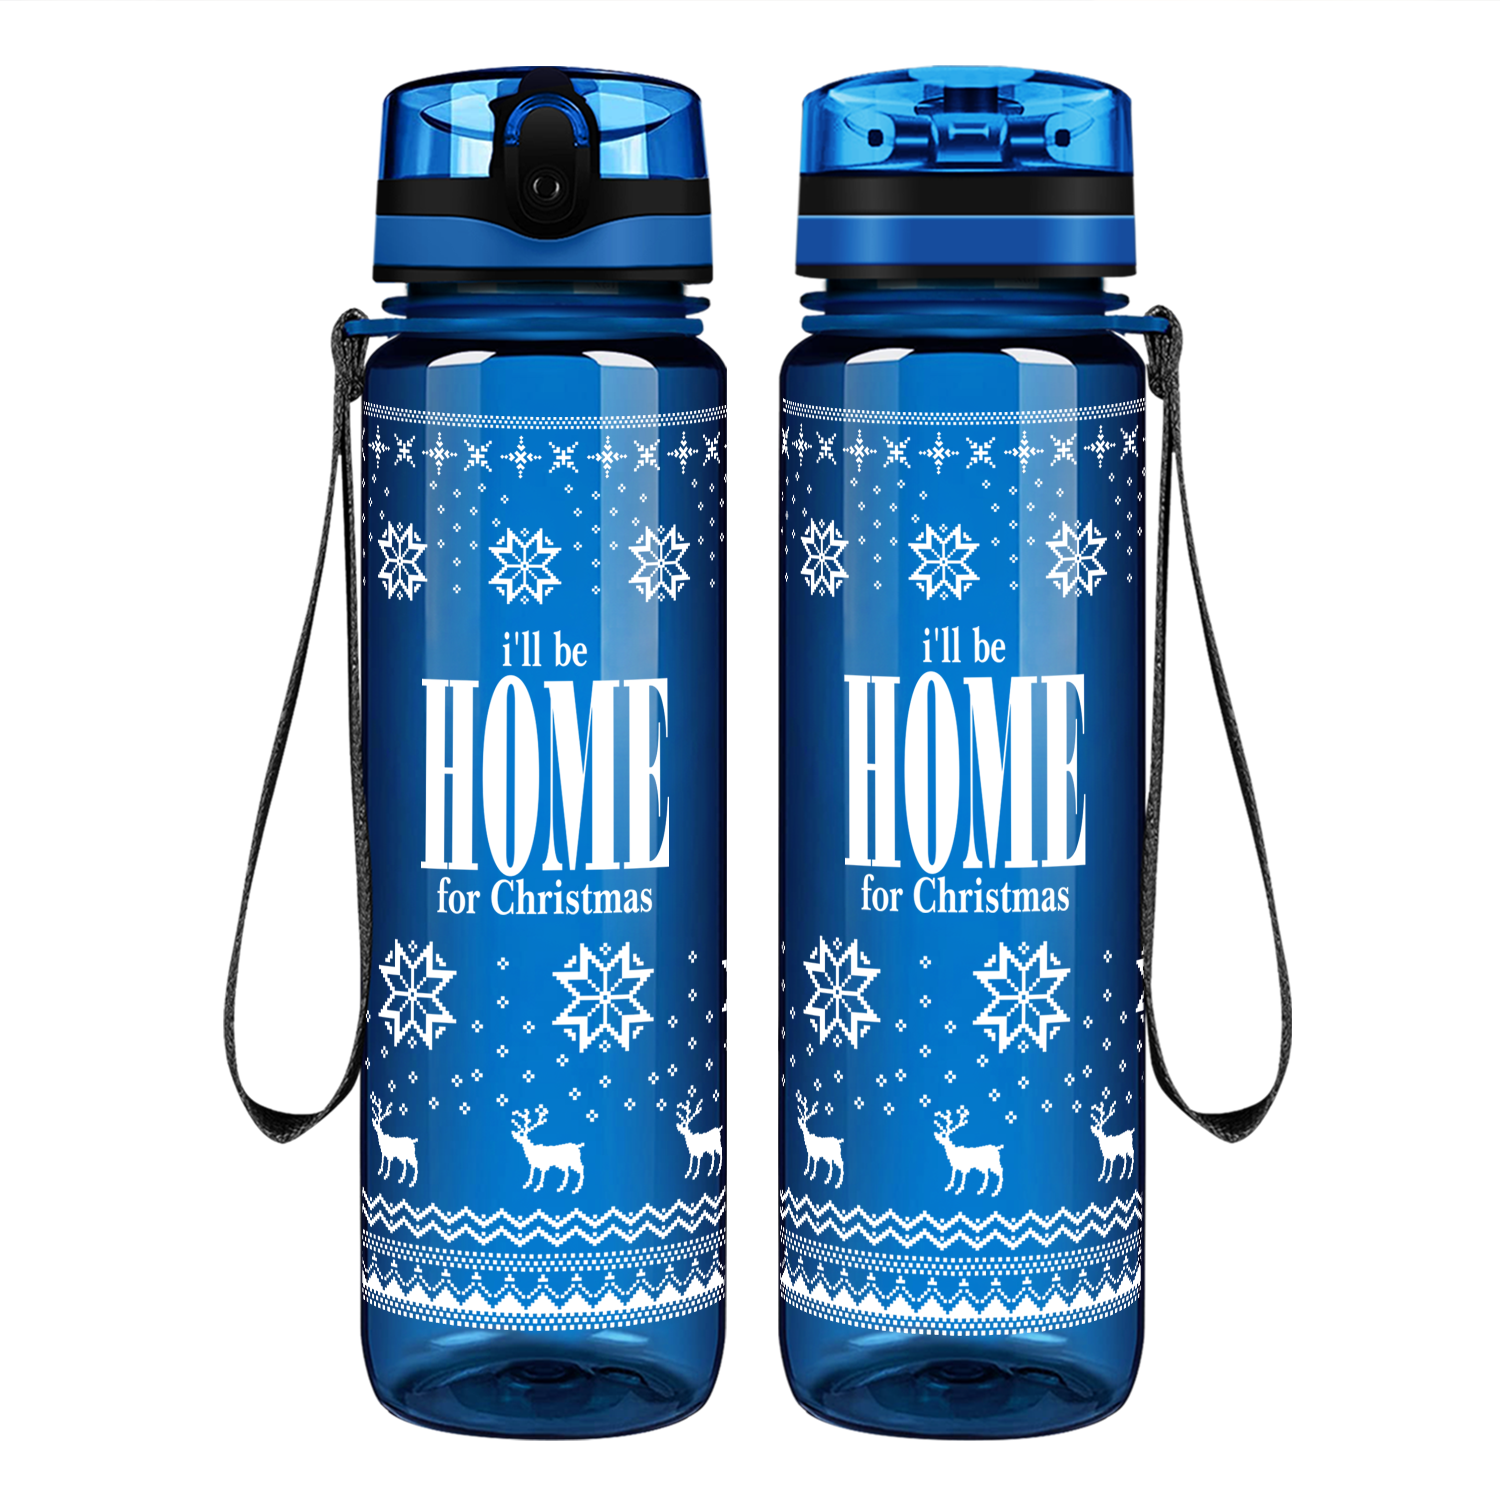 I'll be home for Christmas Motivational Tracking Water Bottle